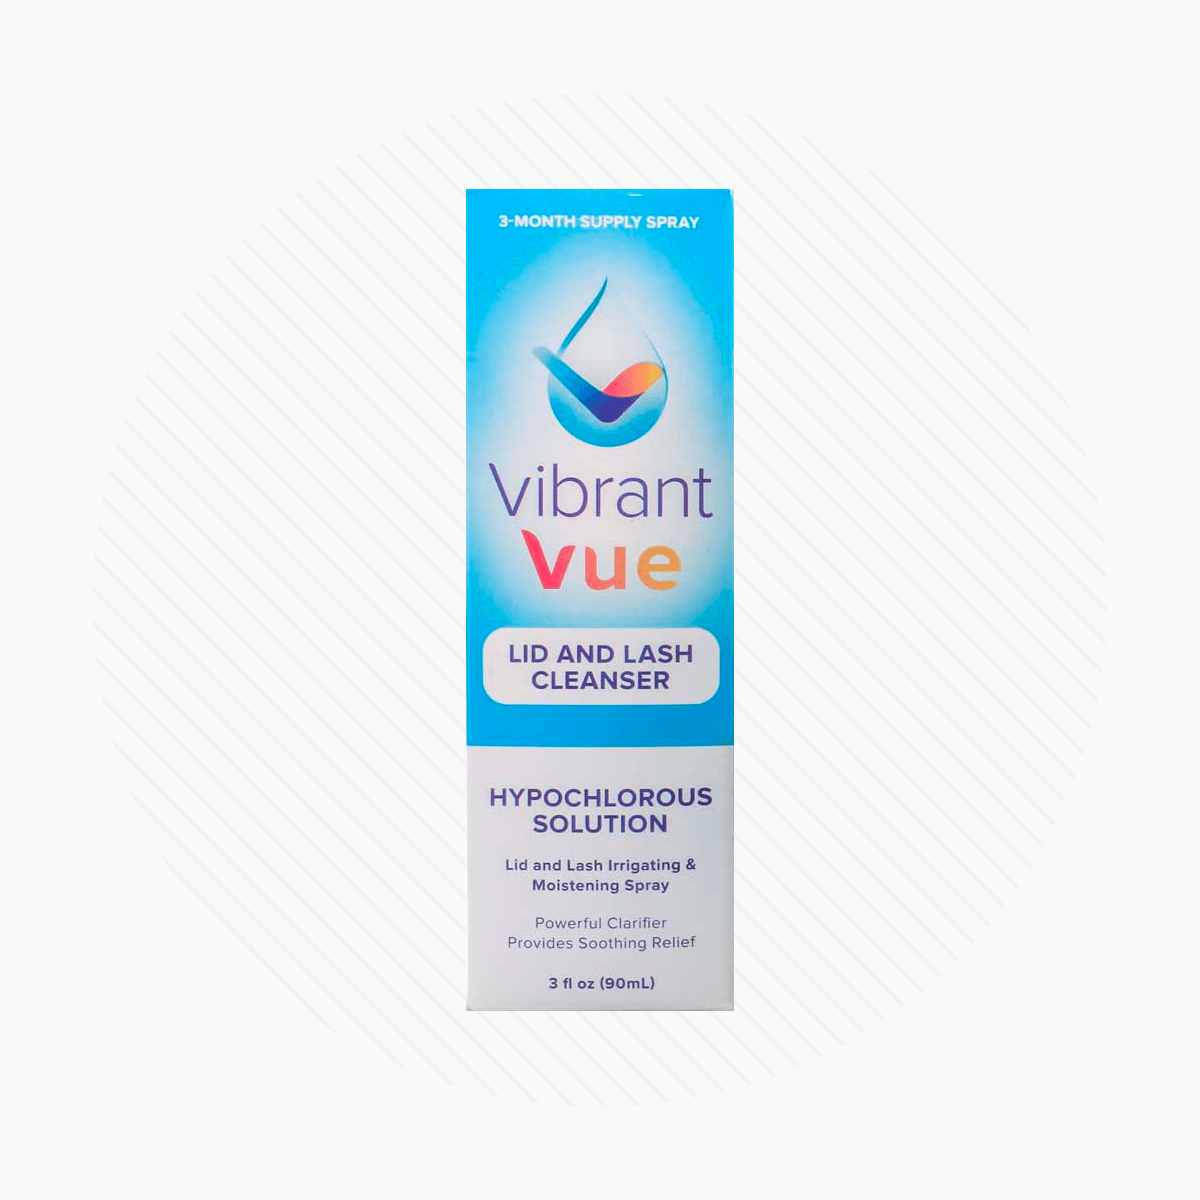 Vibrant Vue Lid and Lash Cleanser, Hypochlorous Solution for Irritated and Dry Eyes (90mL Bottle) 3 Month Supply - DryEye Rescue Store